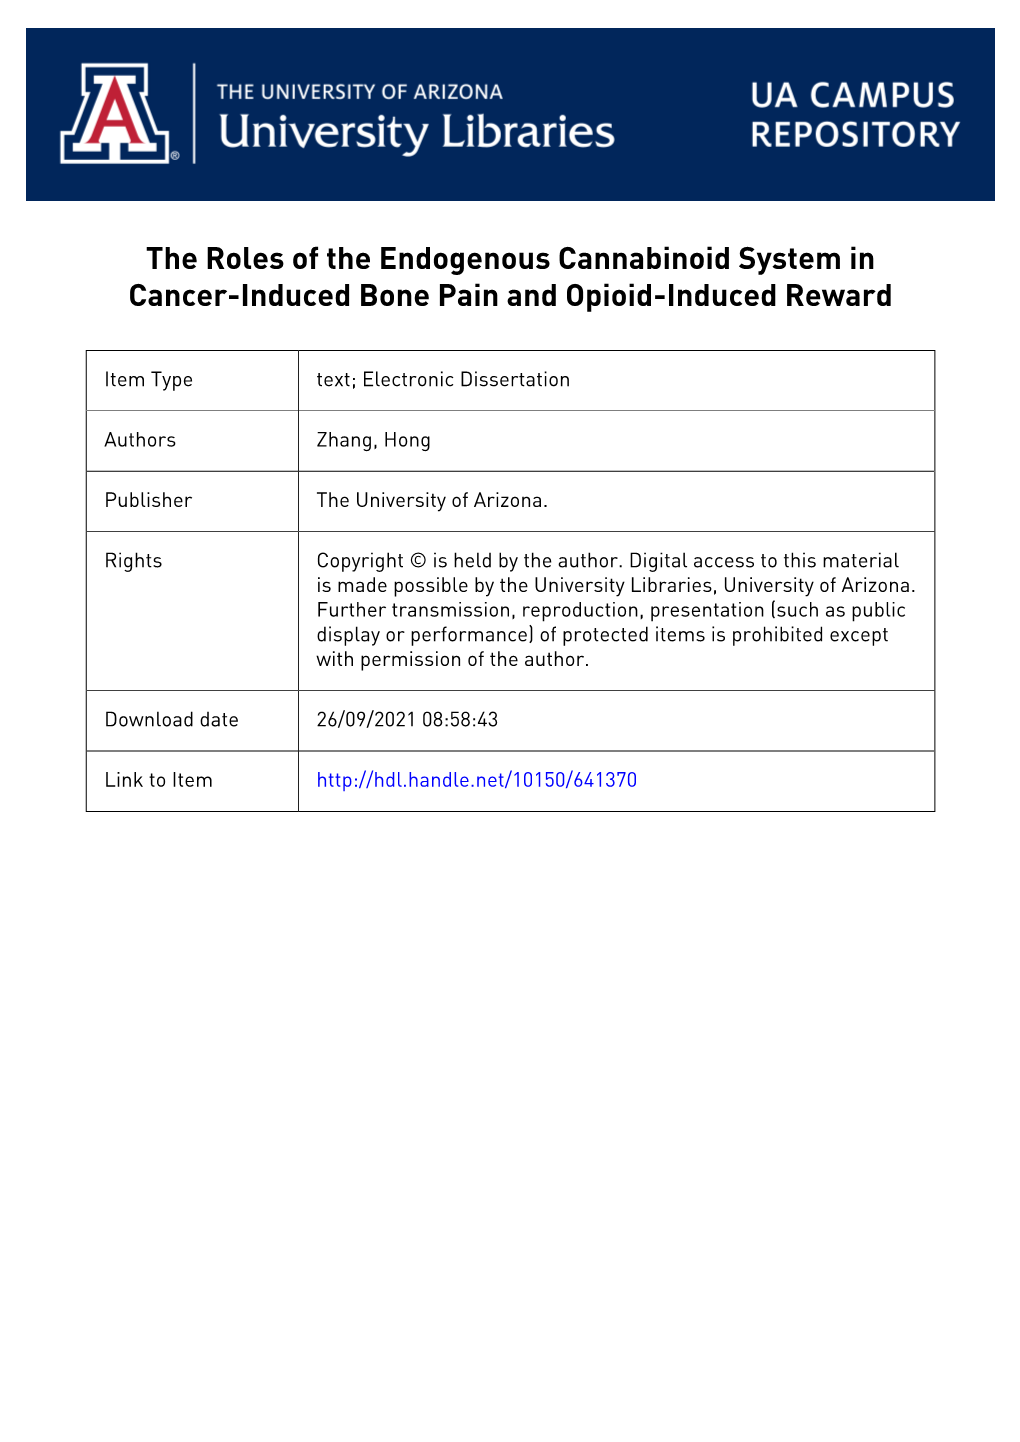 The Roles of the Endogenous Cannabinoid System in Cancer-Induced Bone Pain and Opioid-Induced Reward